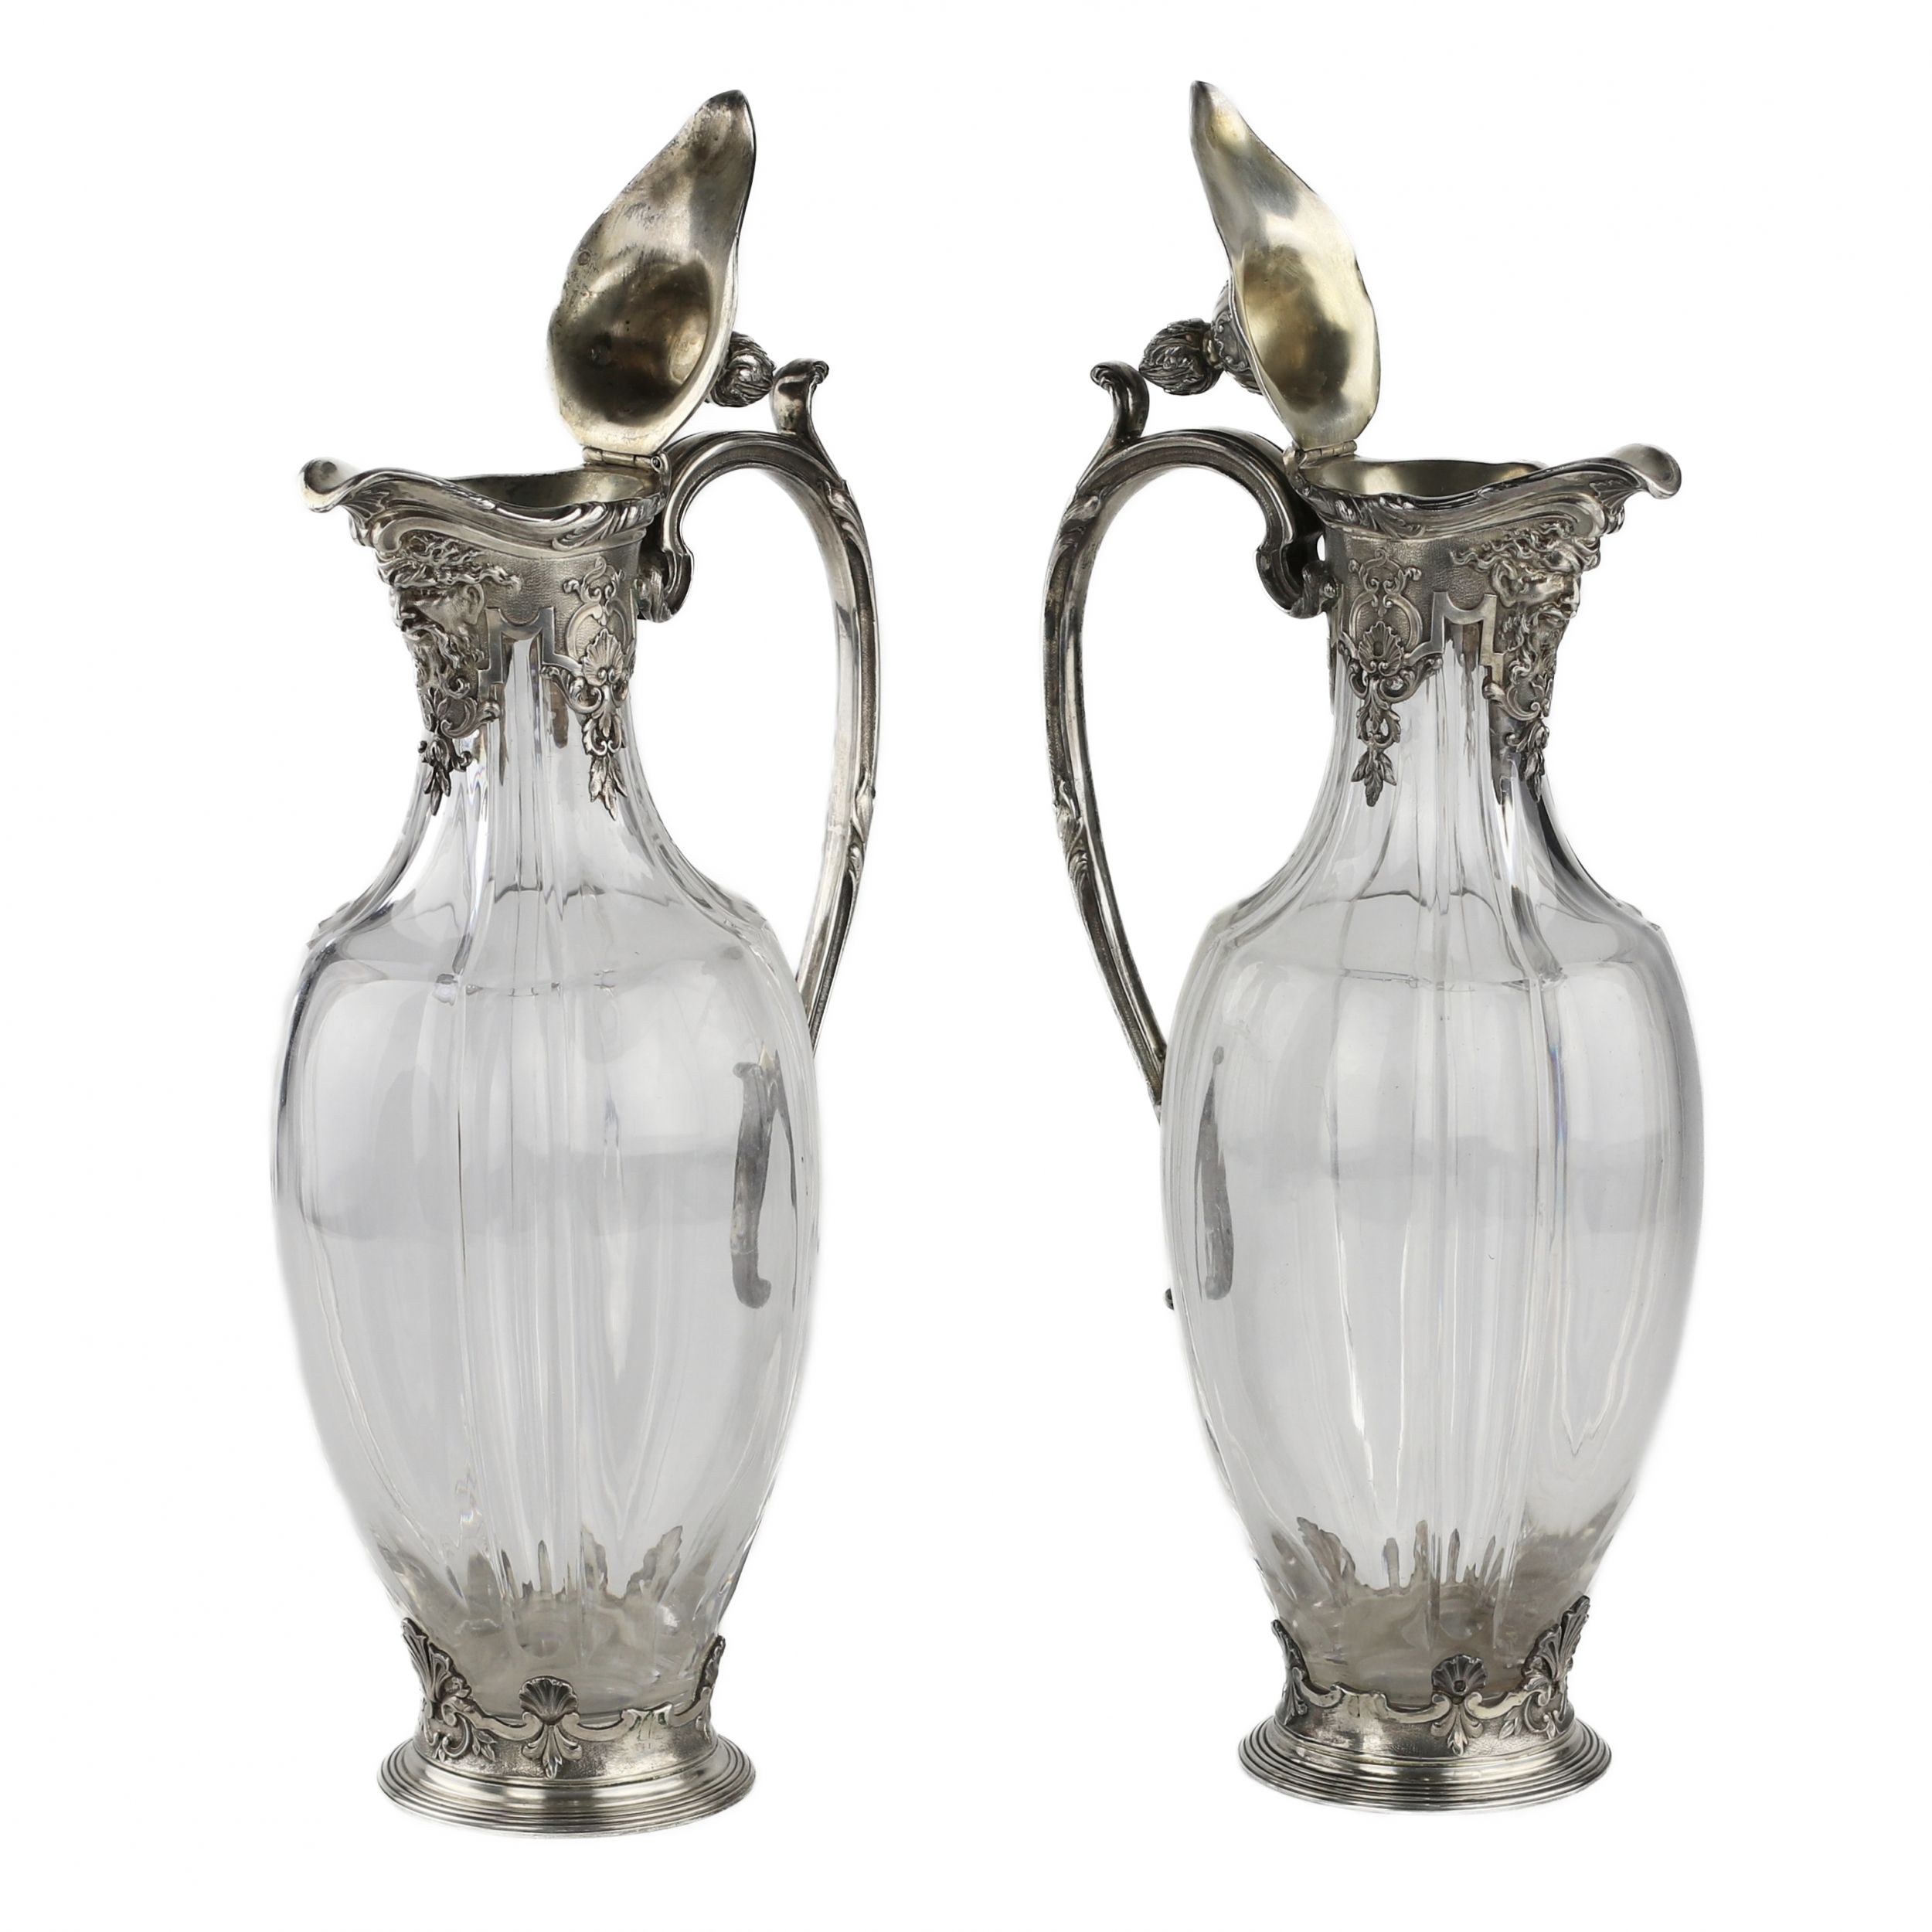 A pair of glass Regency style jugs in silver from CHRISTOFLE. - Image 3 of 9